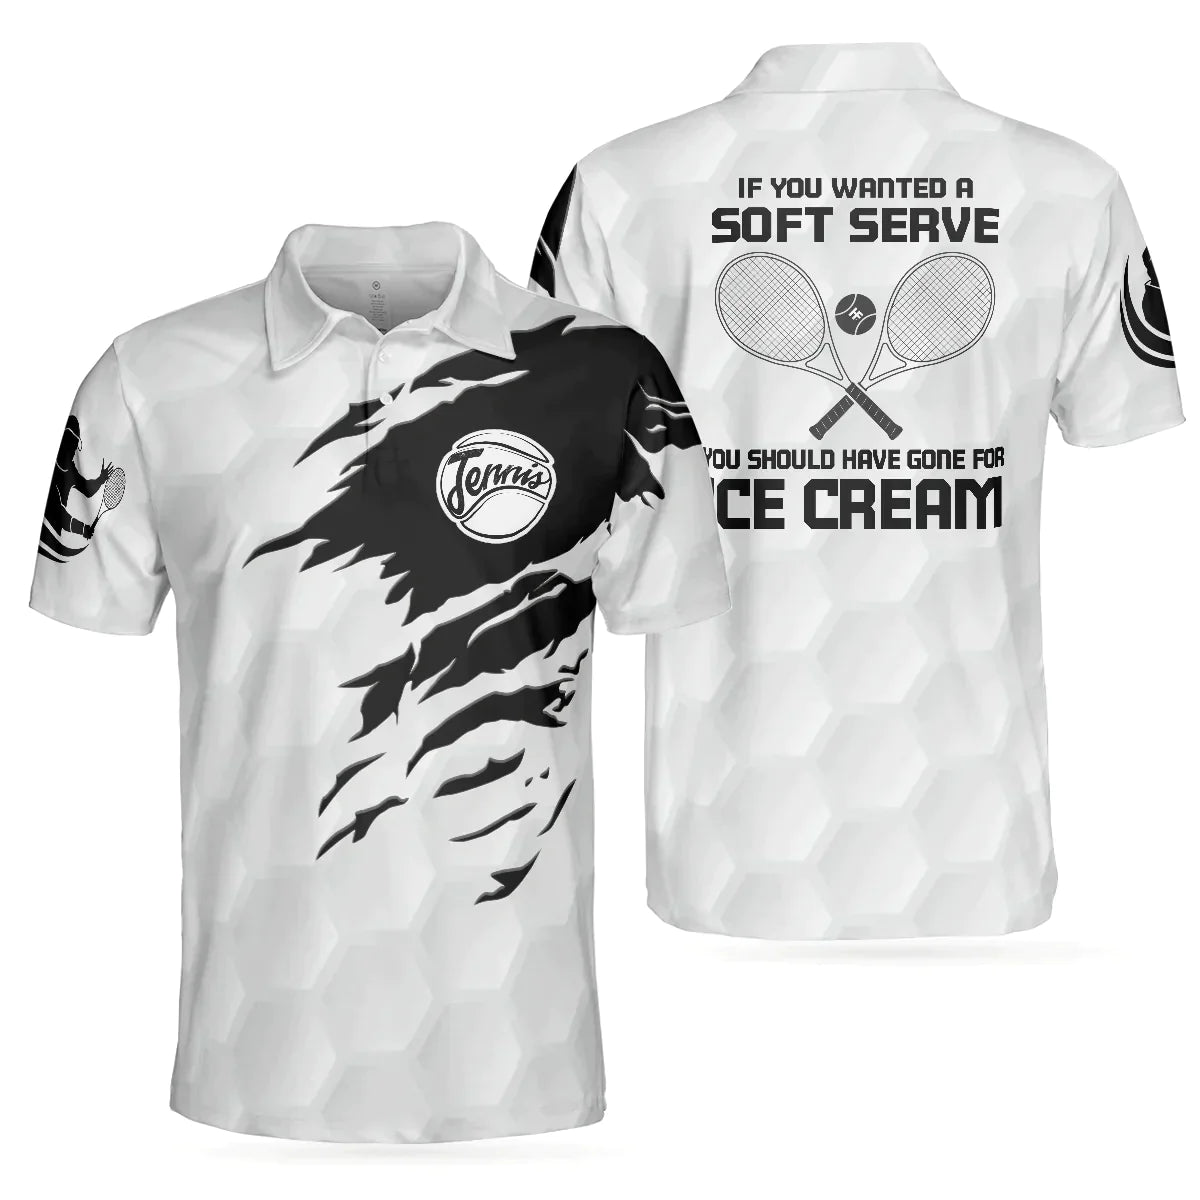 Tennis Men Polo Shirt, If You Wanted A Soft Serve You Should've Gone For Ice Cream Polo Shirt, Tennis Shirt With Sayings For Enthusiasts - Amzanimalsgift